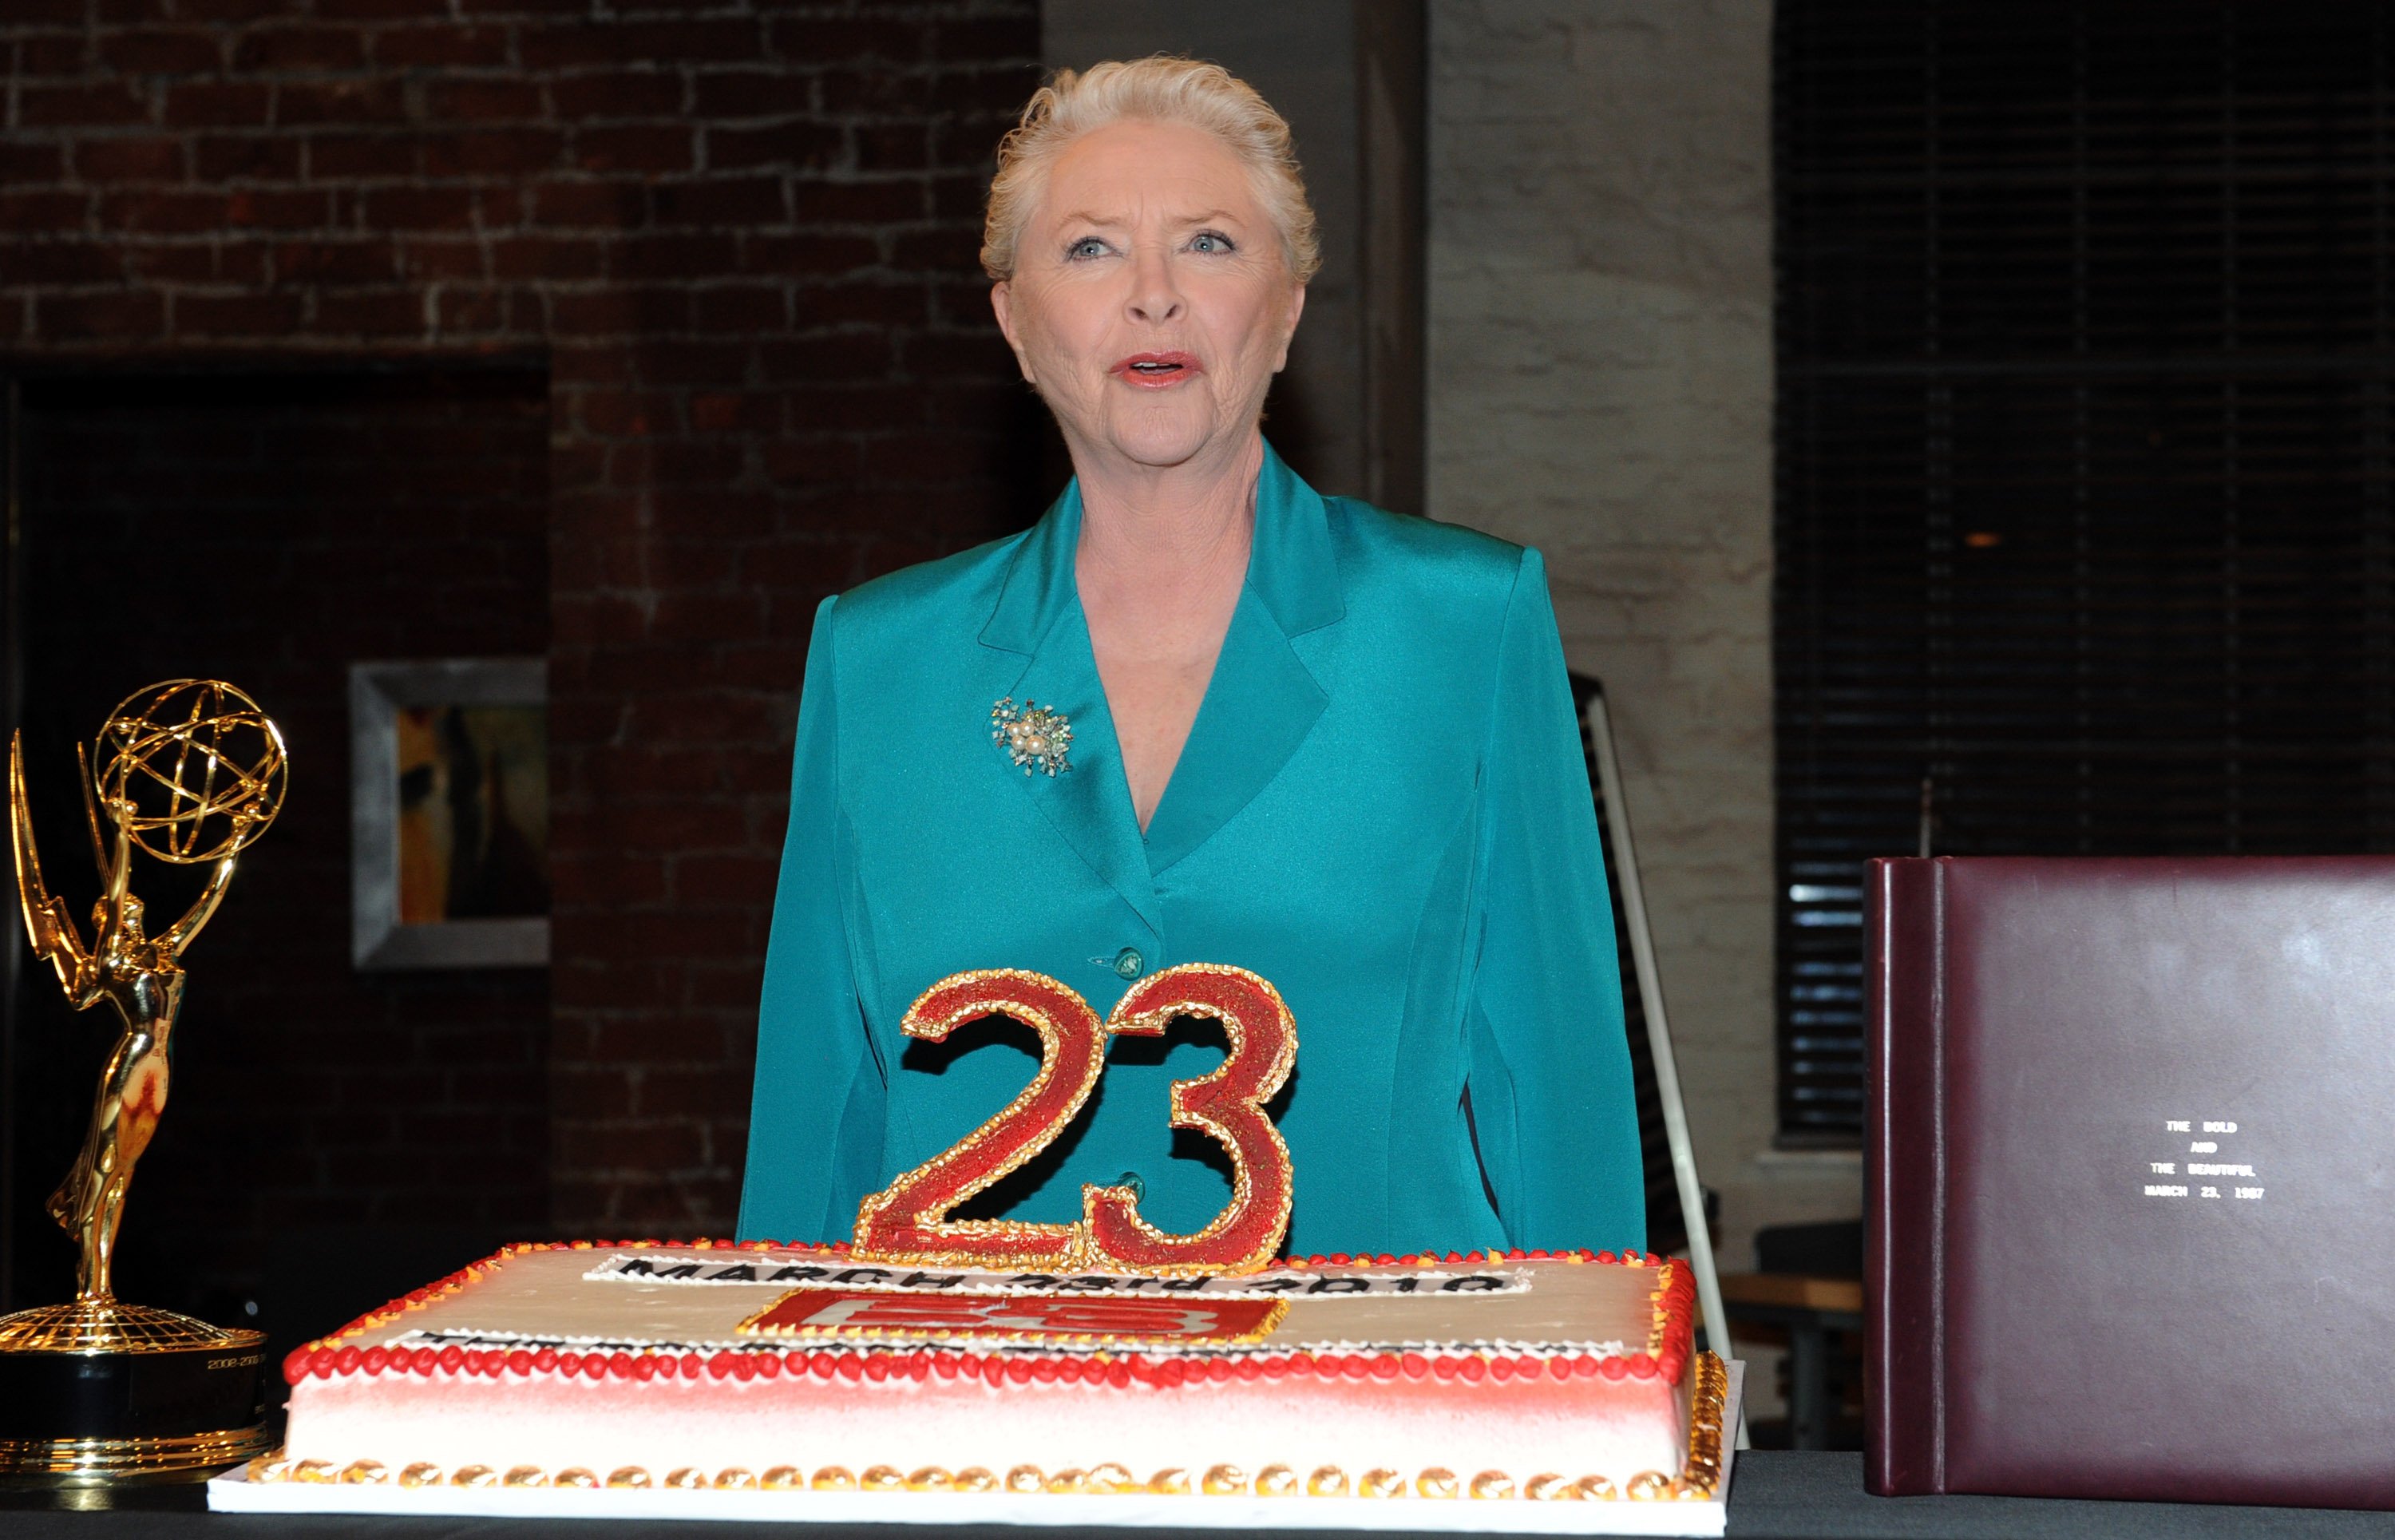 'The Bold and the Beautiful' actor Susan Flannery wearing a blue blouse and standing in front of a cake and Emmy.